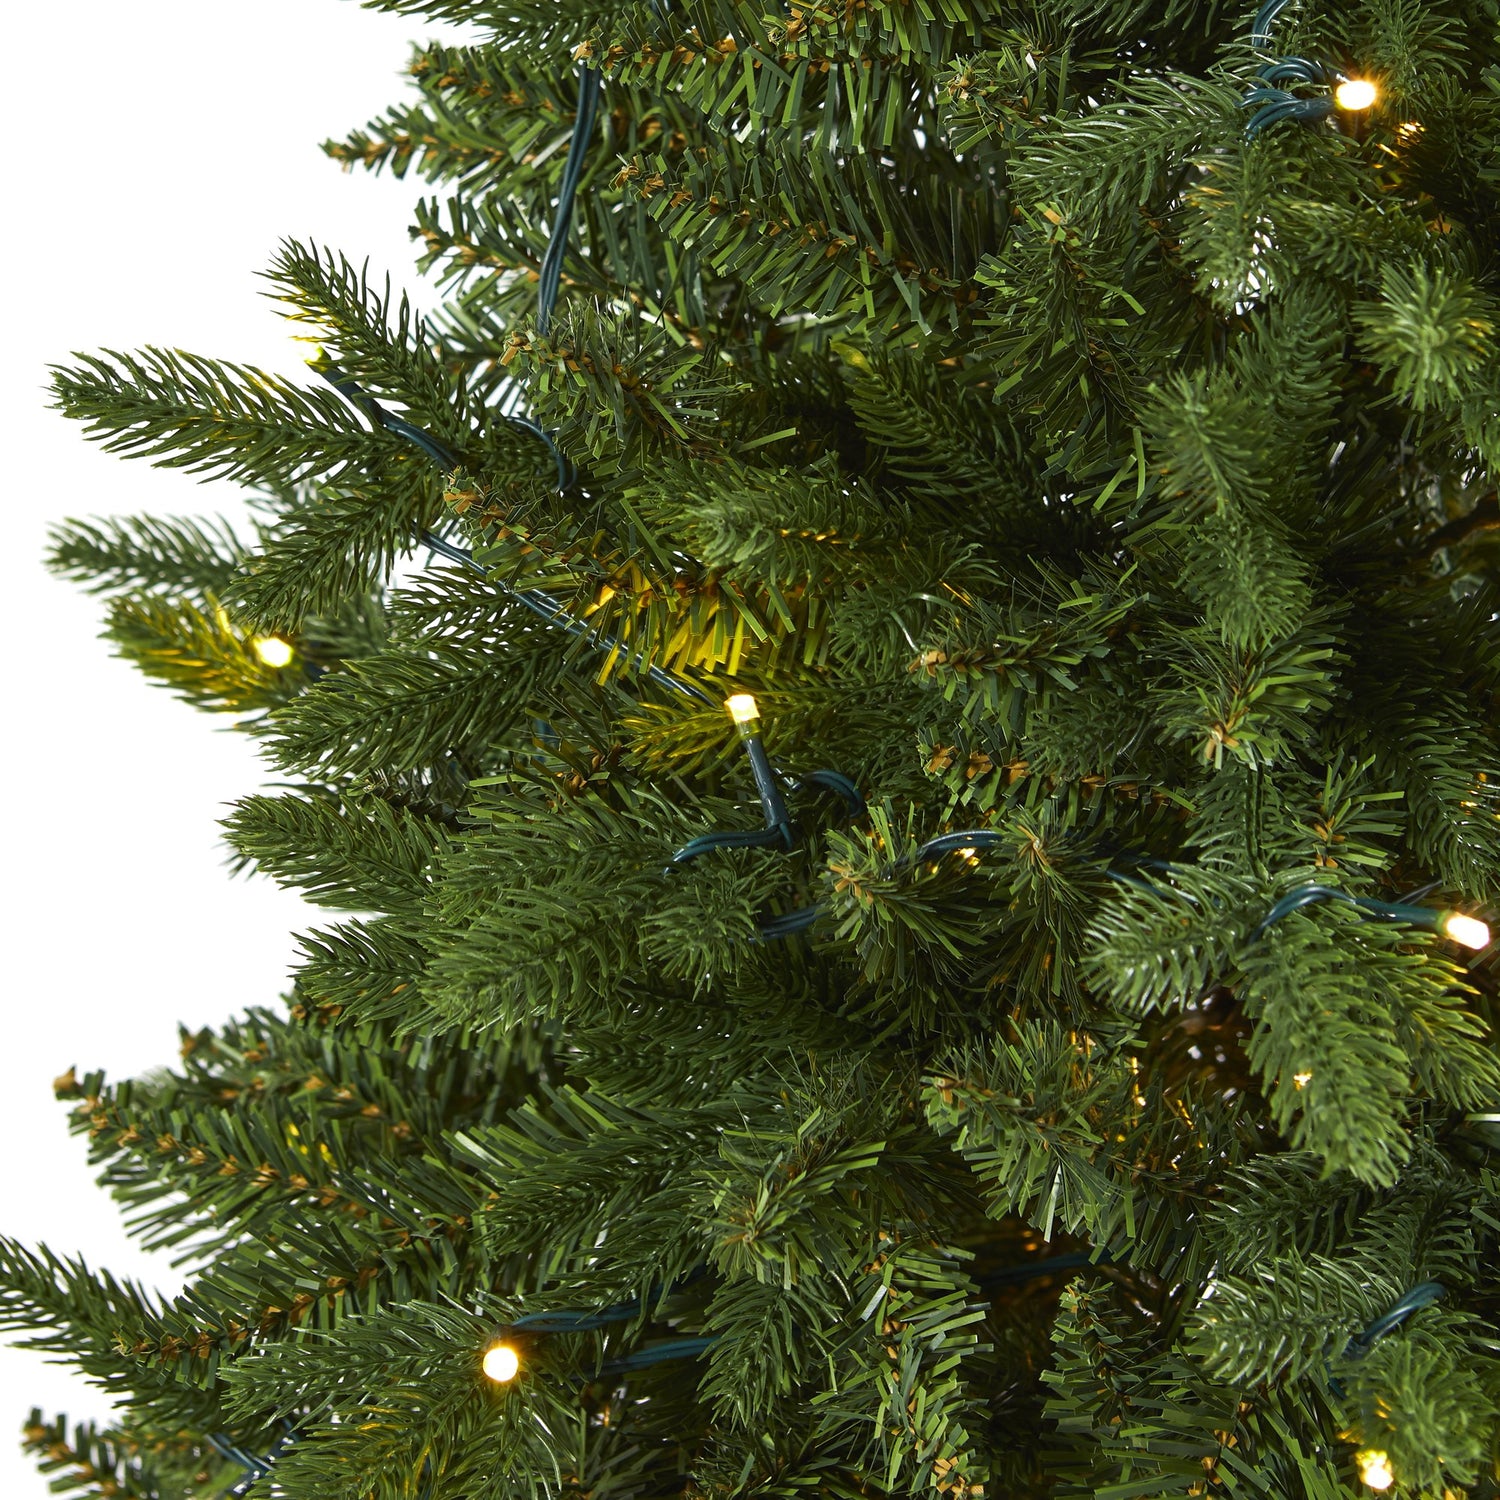 5' New Hampshire Fir Artificial Christmas Tree with 150 LED Lights